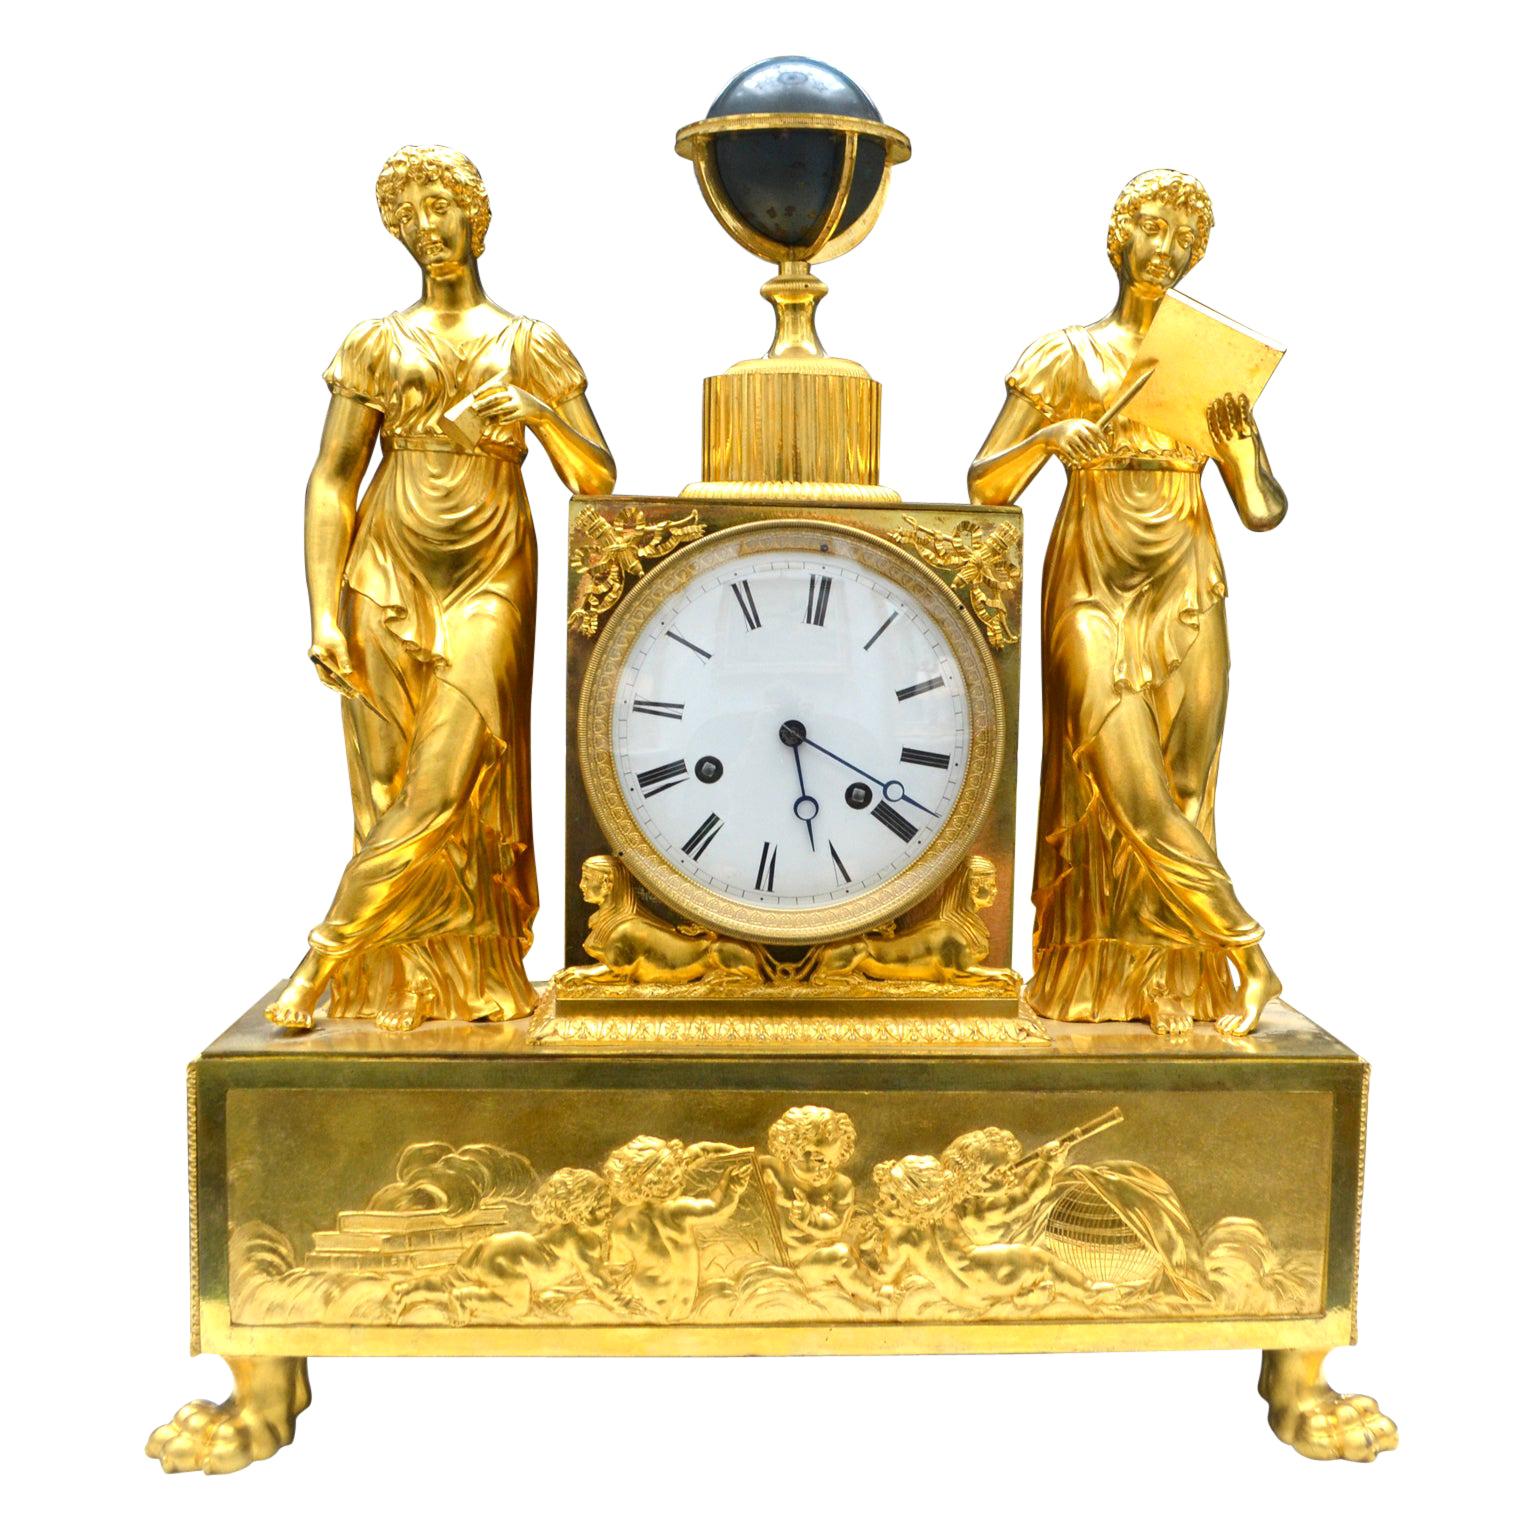  French Empire Gilt Bronze Allegorical Clock Depicting the Astronomical Sciences